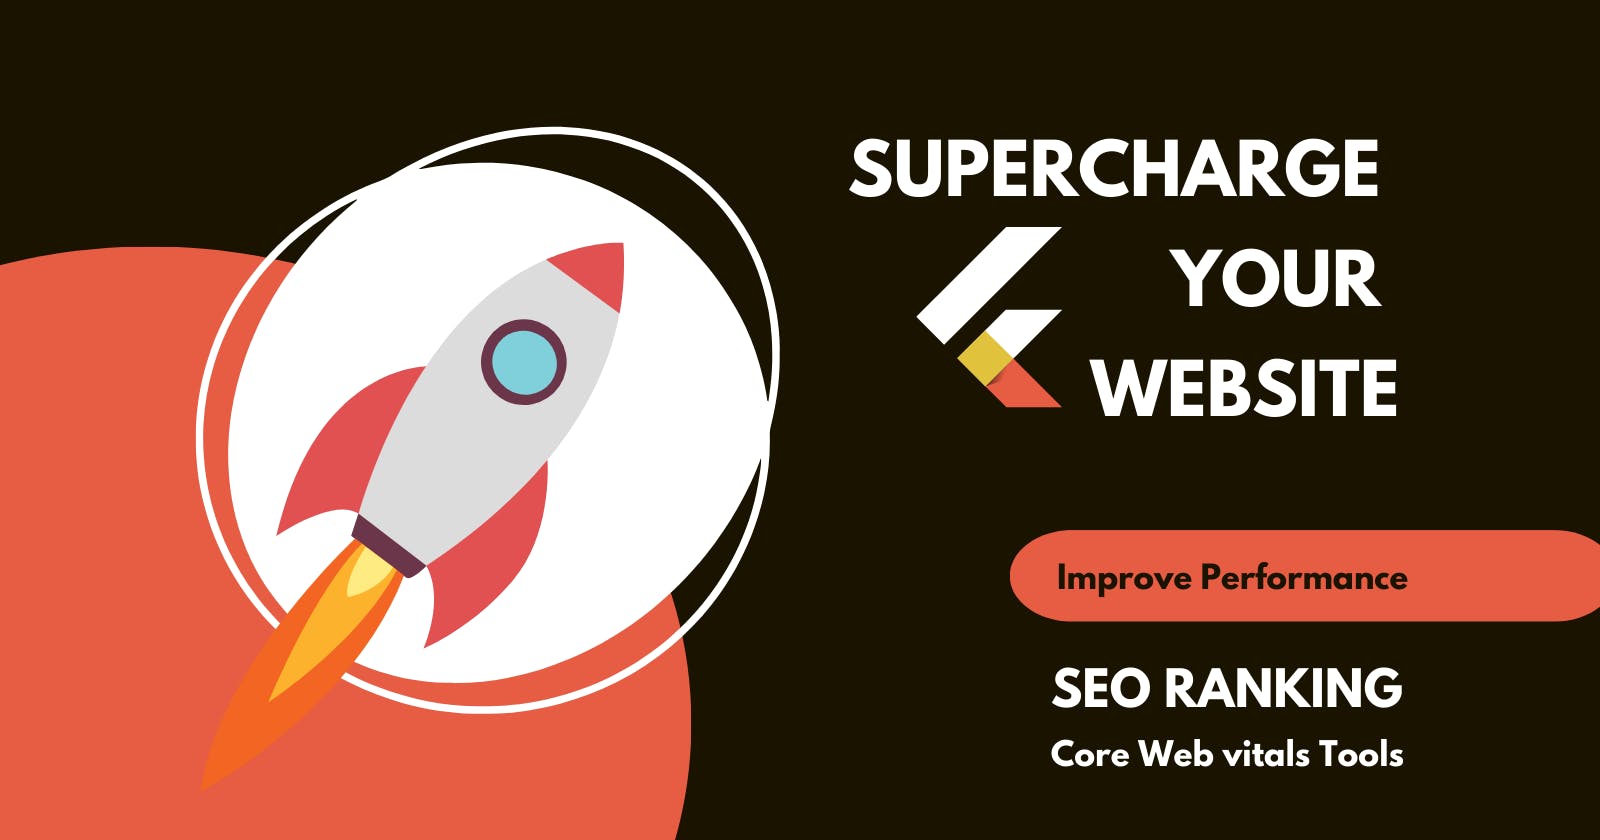 Supercharge Your Website with Google's Web Vitals: The Ultimate Guide